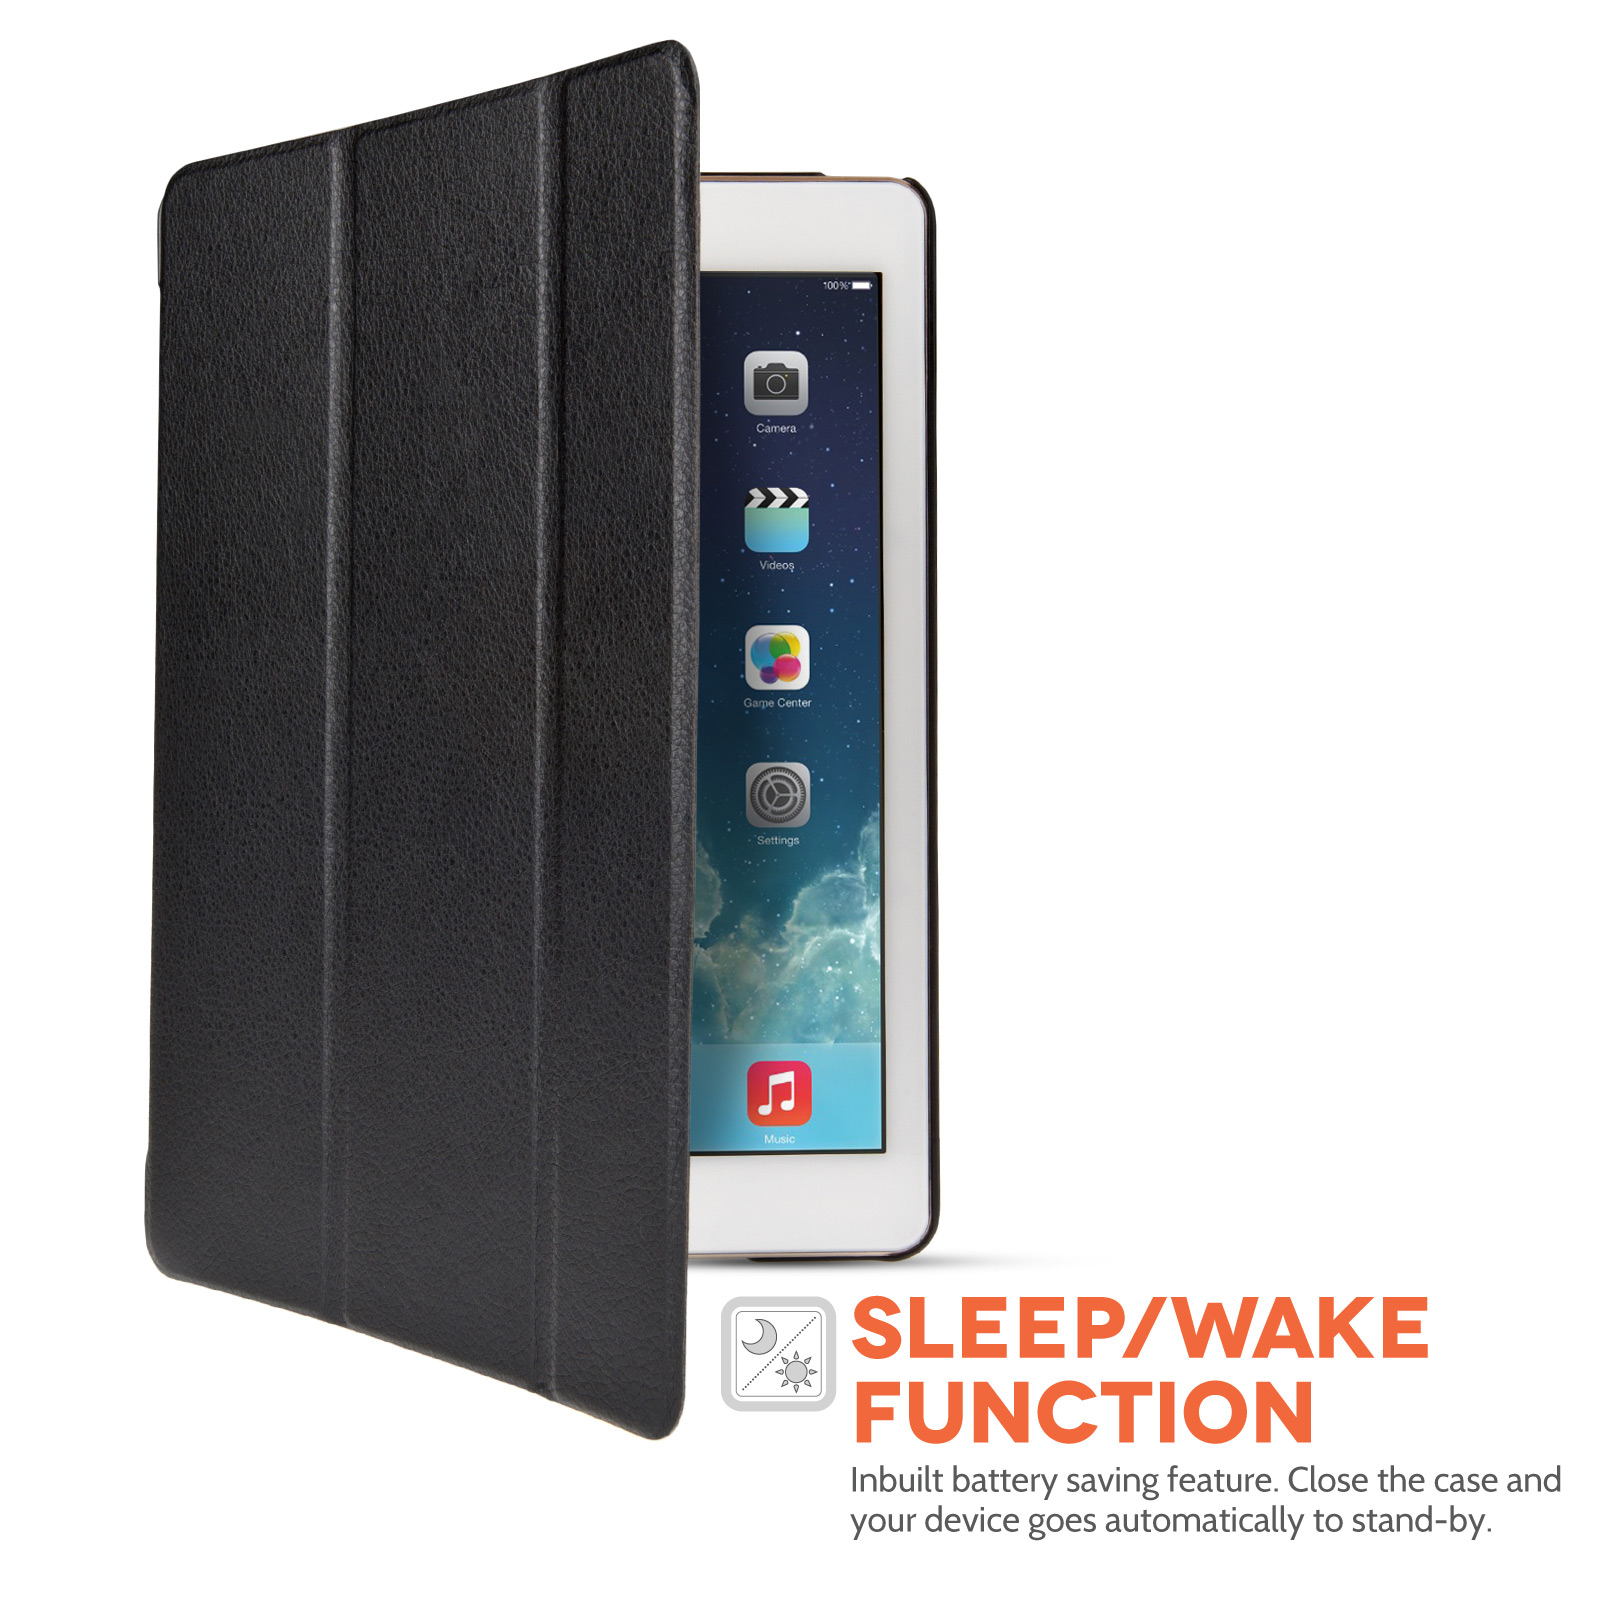 YouSave iPad Air 2 PU Leather Smart Cover with Sleep/Wake and Stand Functions Black